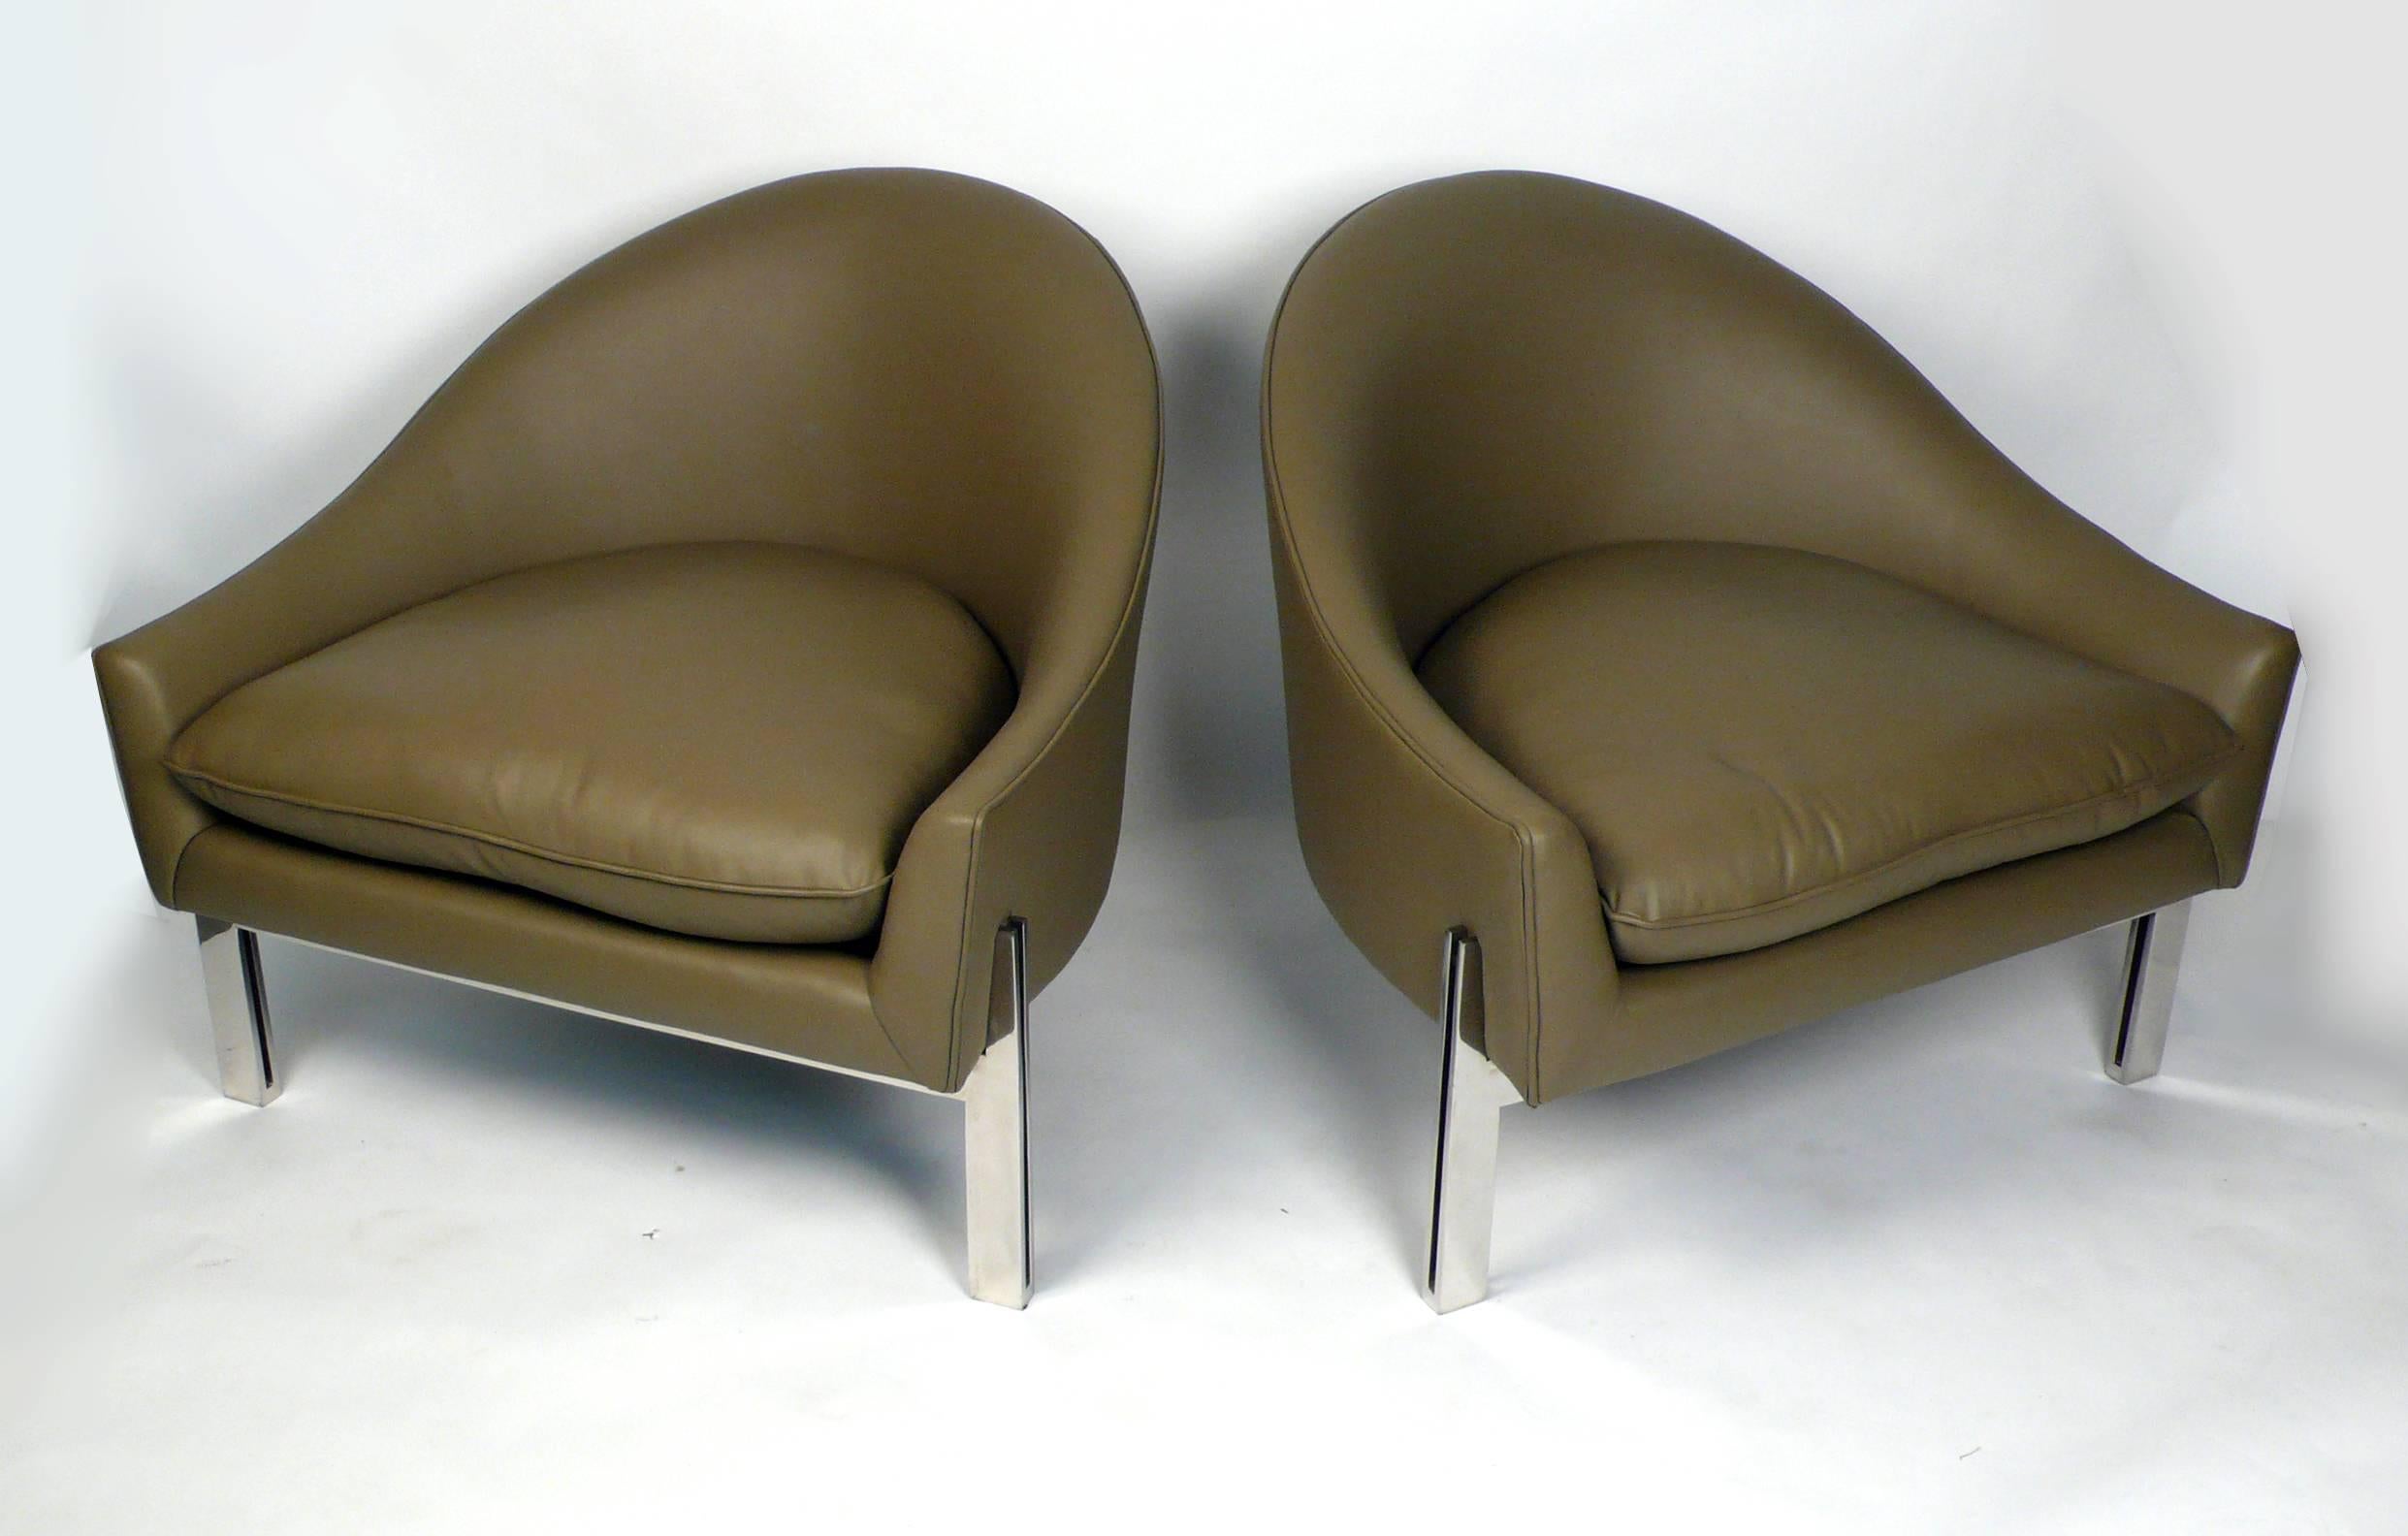 Club chairs designed by Edward Axel Roffman. Chairs are constructed with polished flatbar stainless steel construction with new Spinneybeck leather upholstery. Excellent condition.